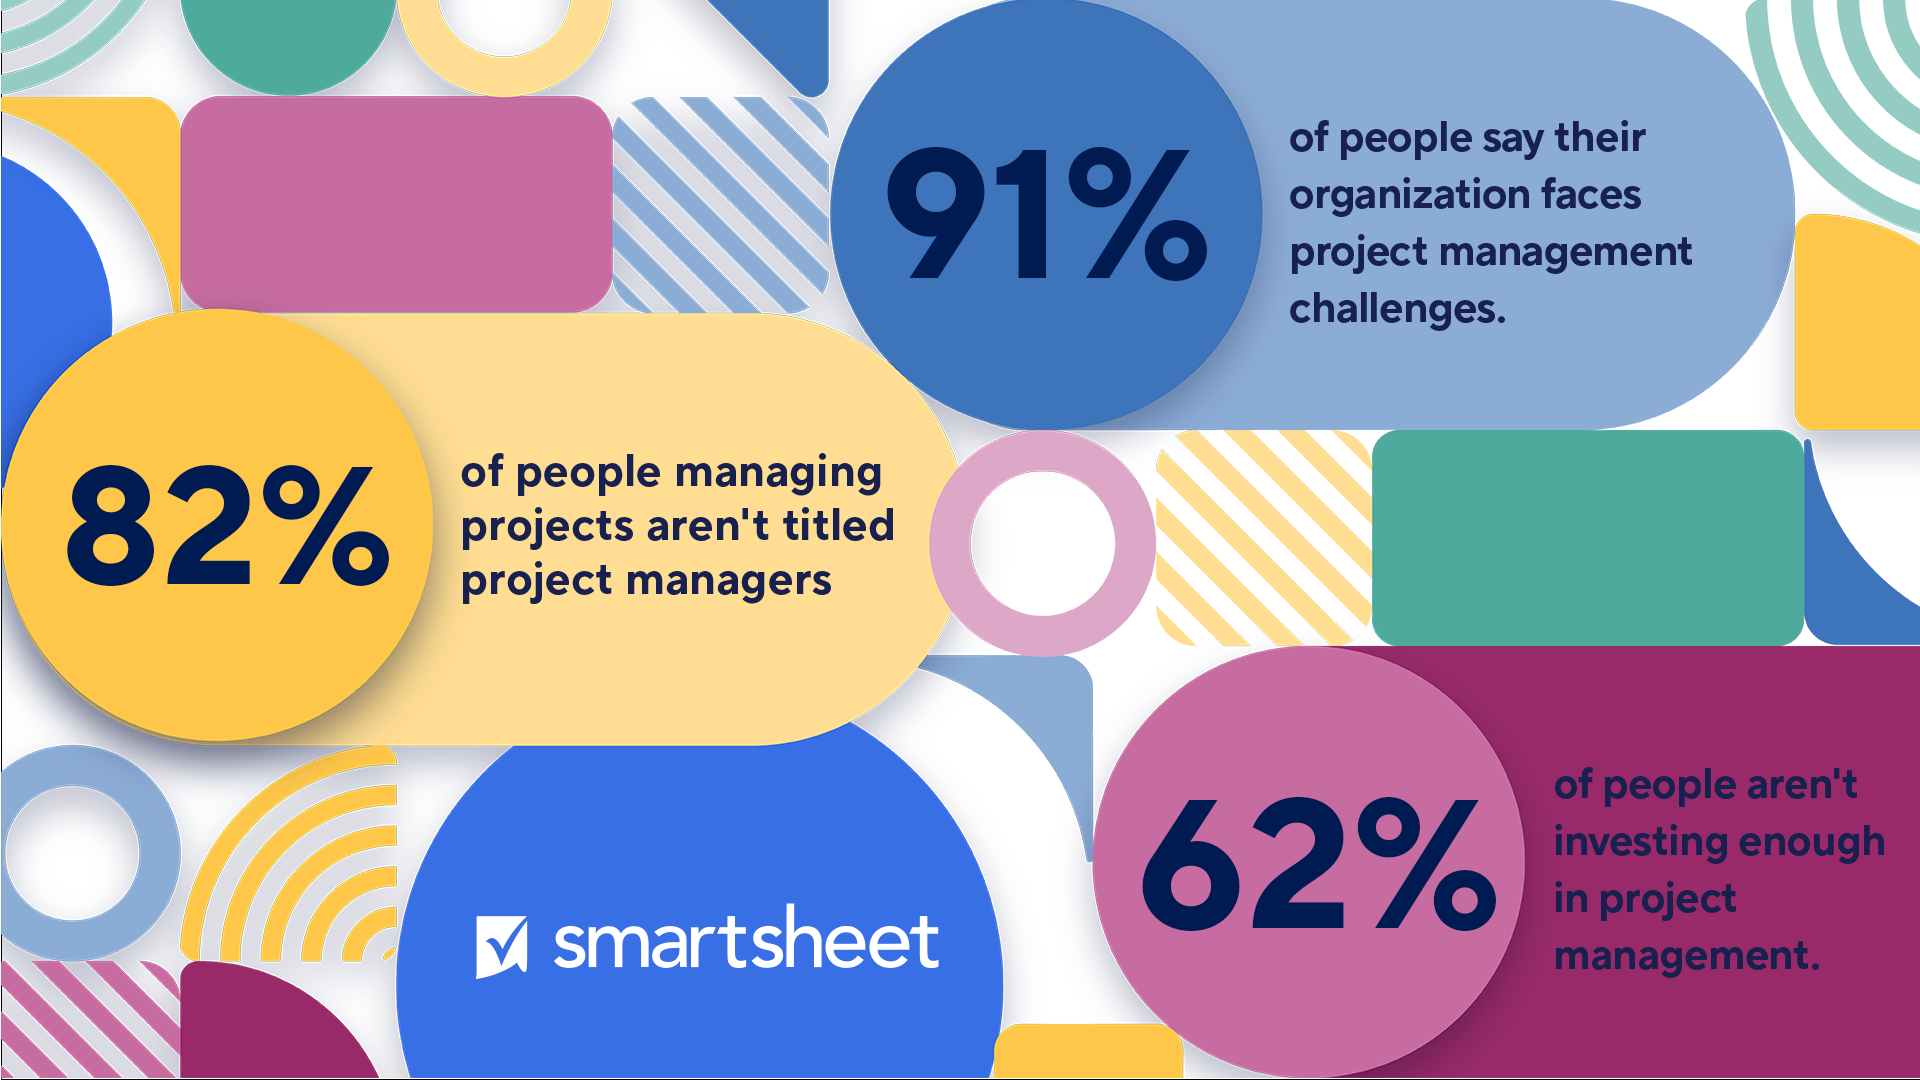 Multi-color image with three text bubbles that highlight key statistics from Future of Work Management report